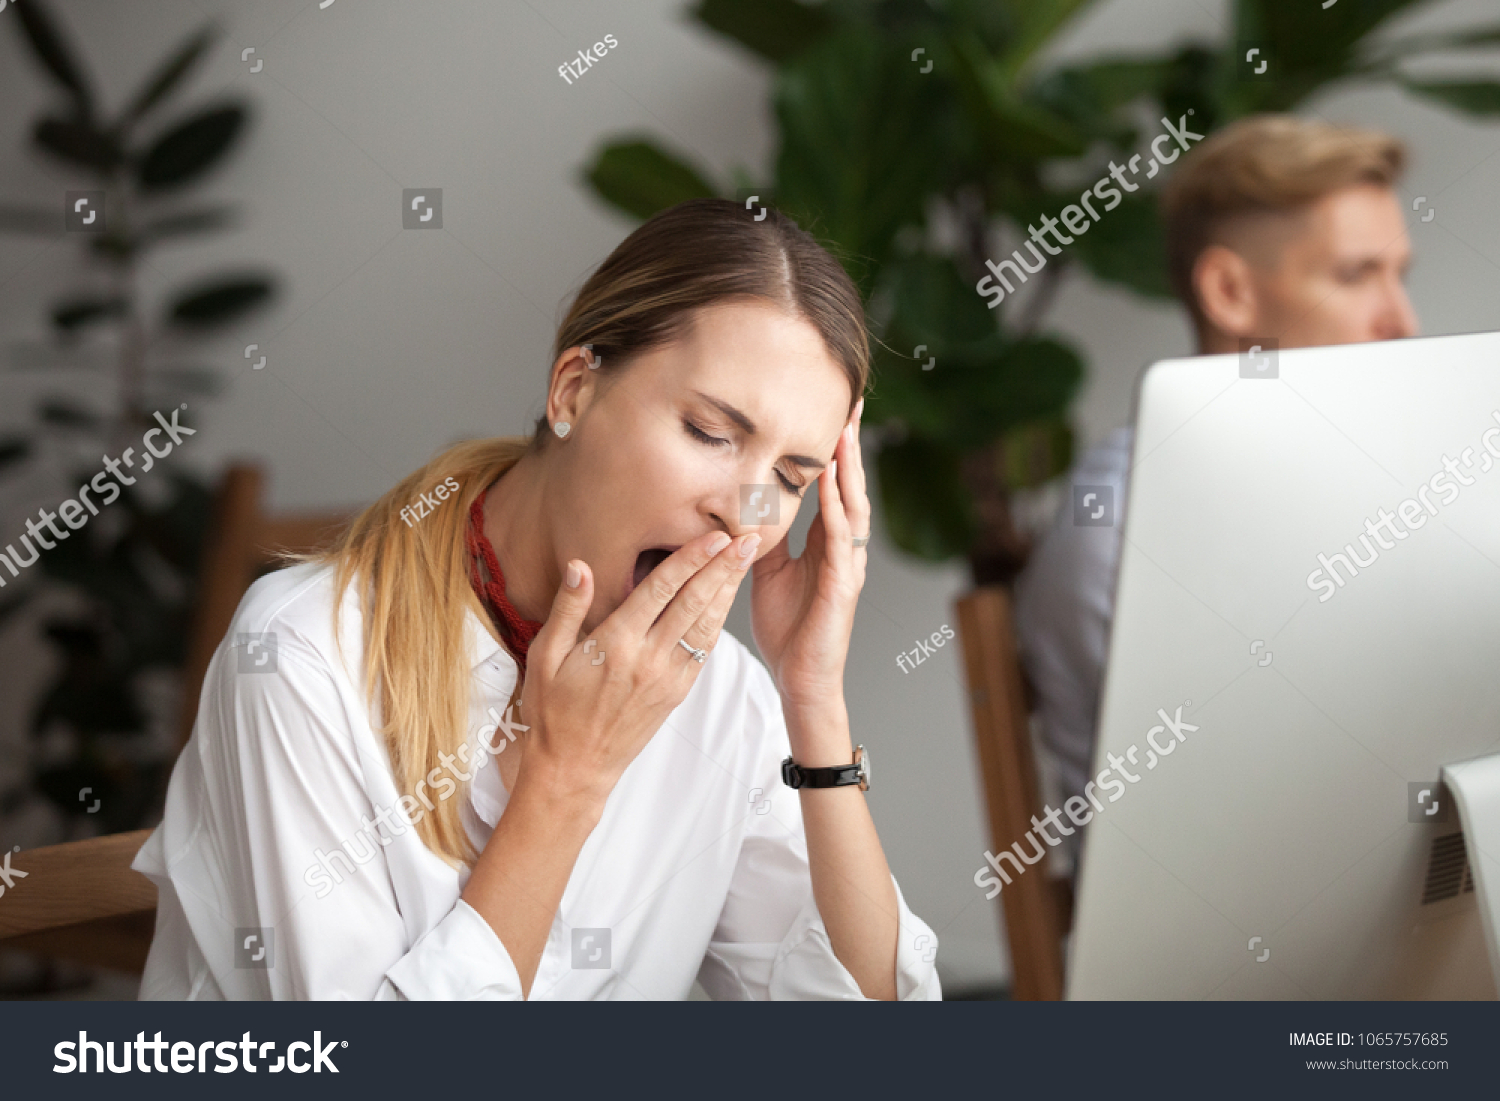 Bored businesswoman yawning at workplace feeling no motivation or lack of sleep tired of boring office routine, exhausted restless employee gaping suffering from chronic fatigue or overwork concept #1065757685